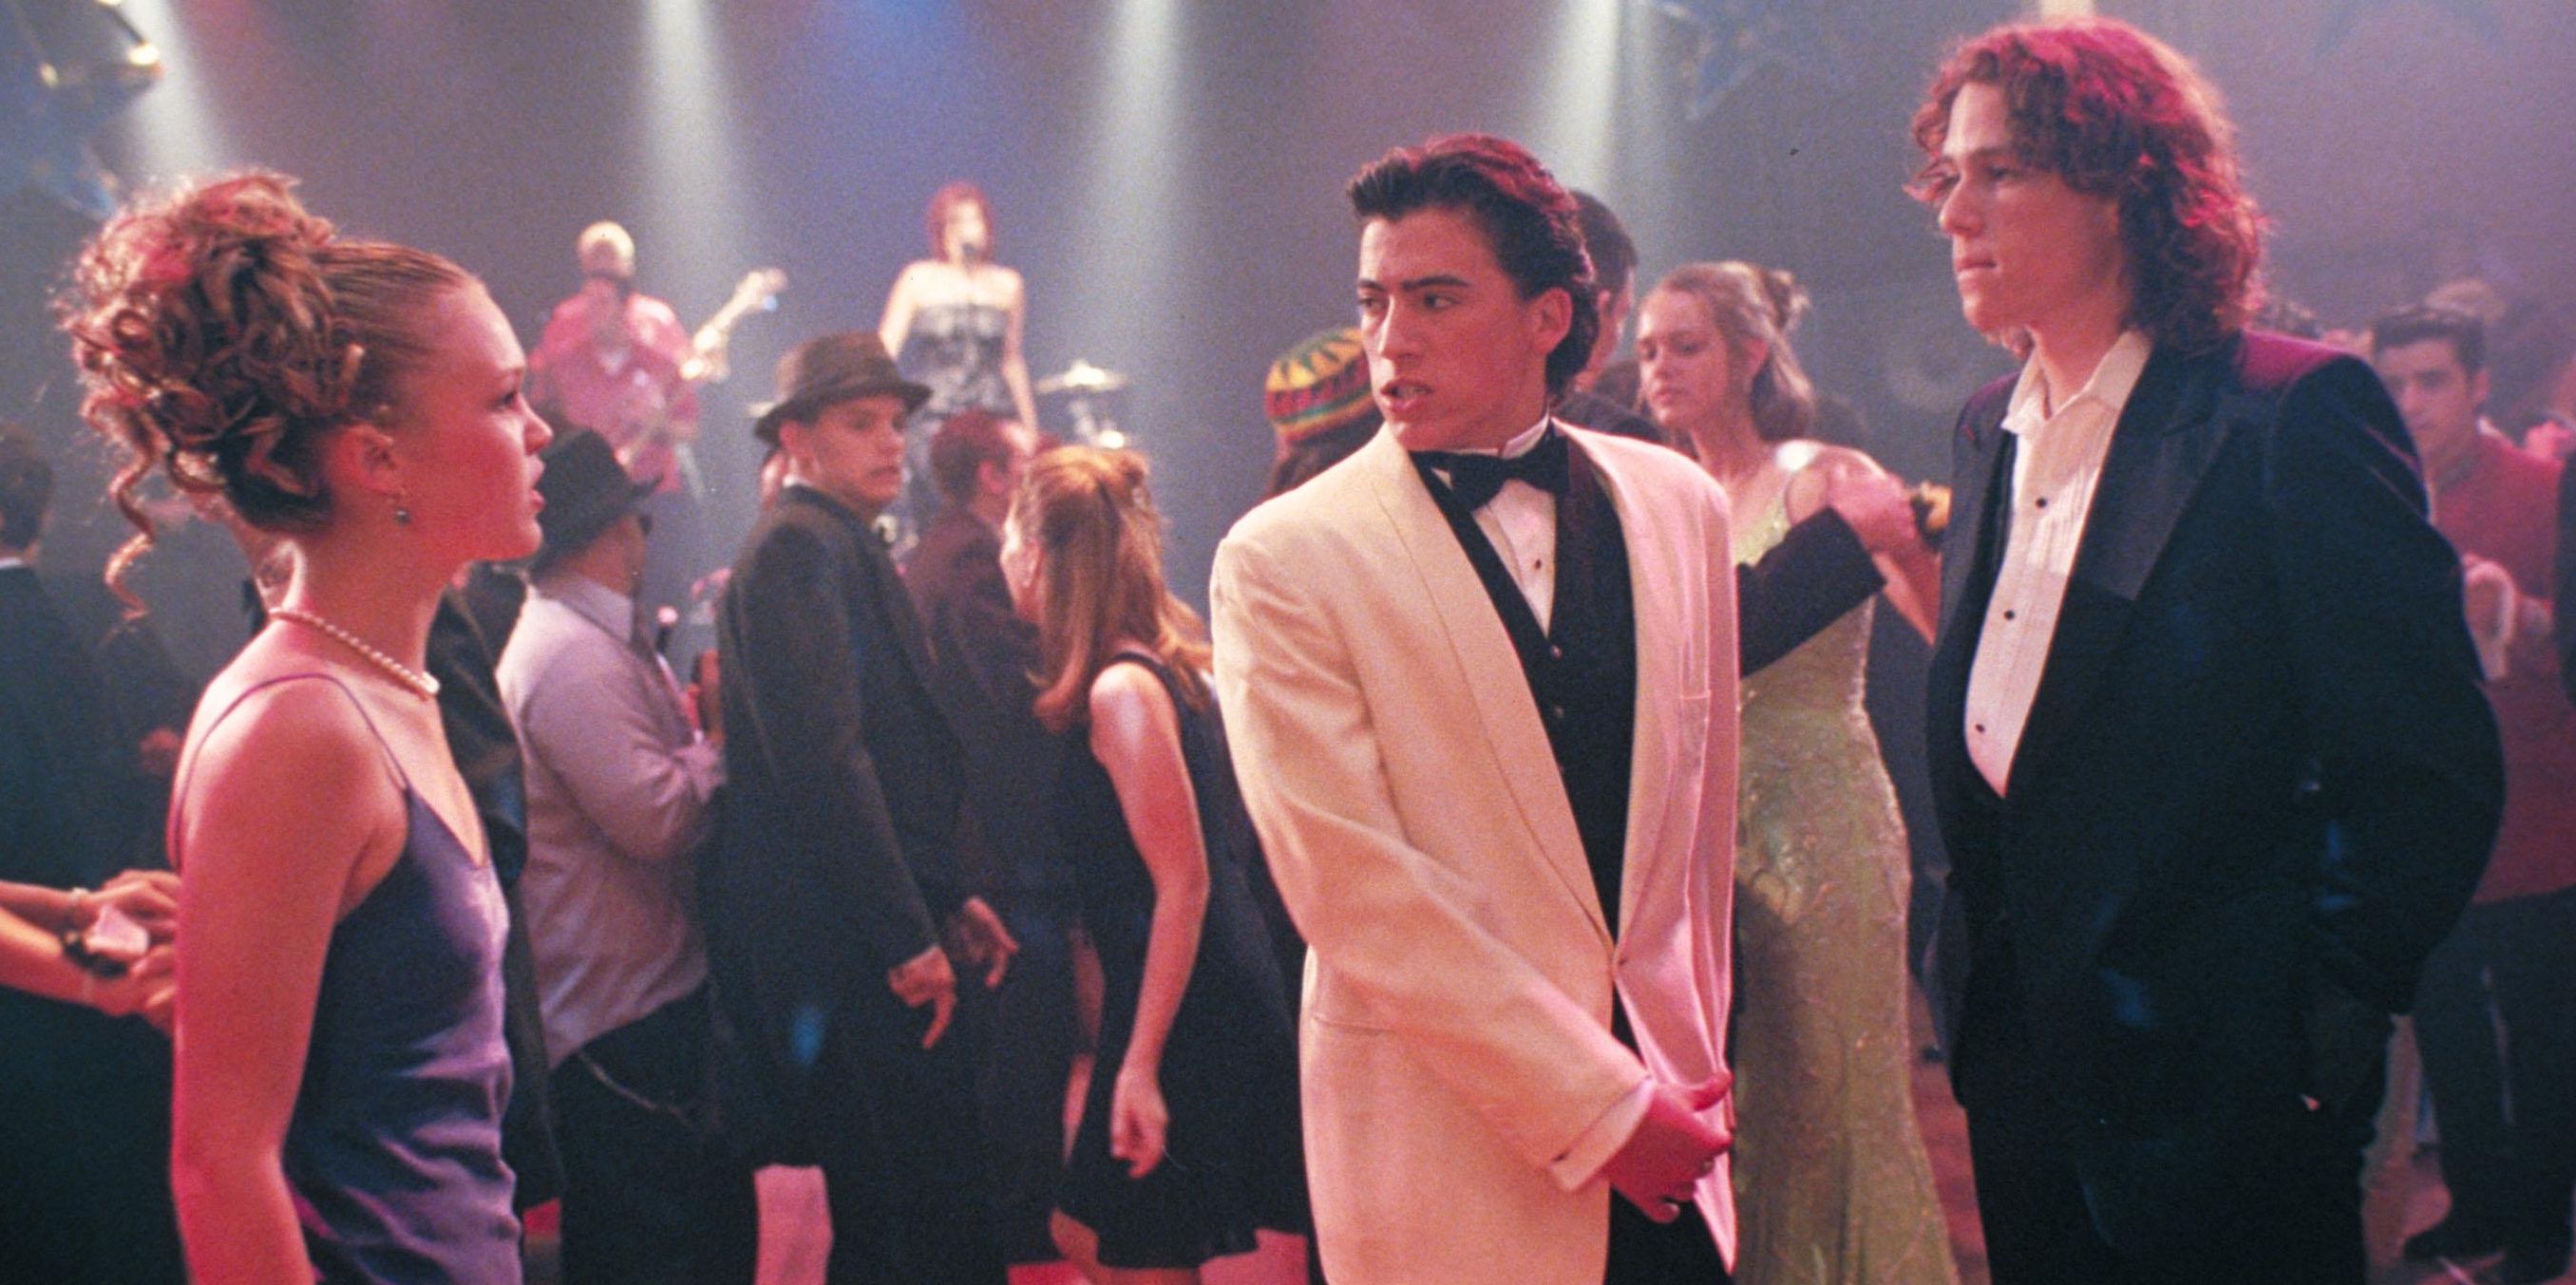 10 Things I Hate About You Prom